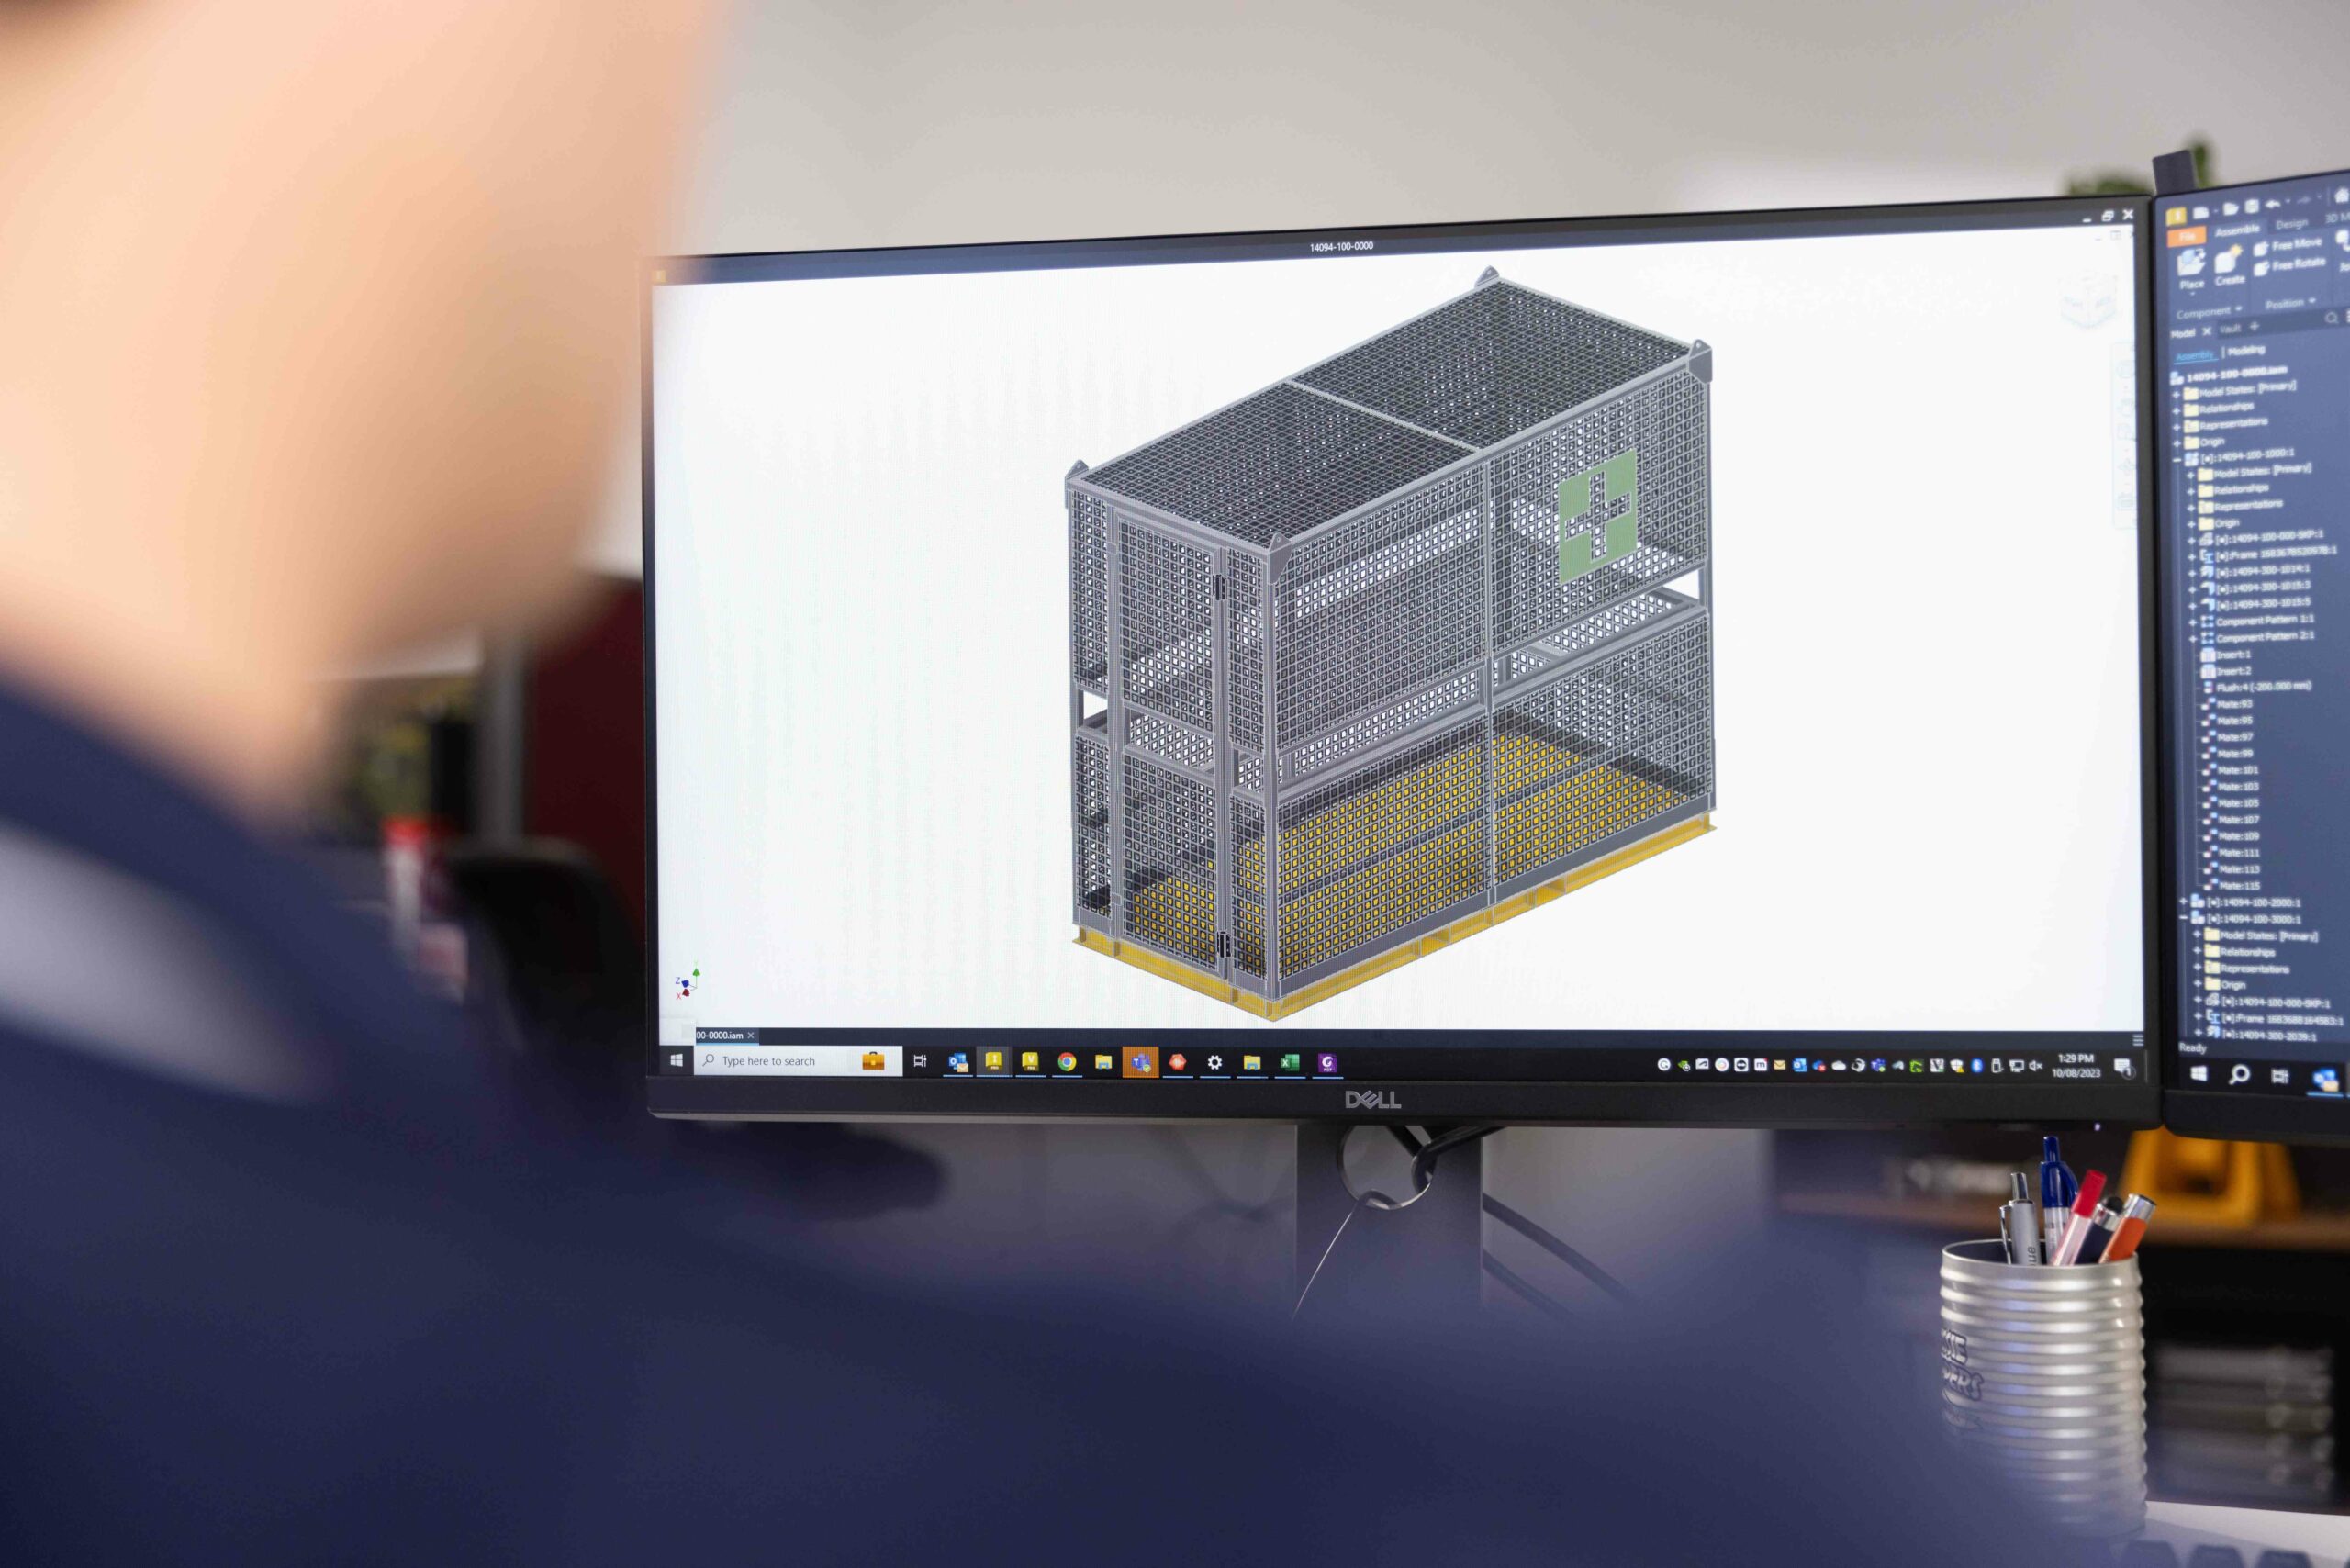 A new custom-designed first aid lifting cage was developed by an expert engineering consultant using advanced design and engineering practices, including Autodesk Inventor CAD software and Finite Element Analysis (FEA).